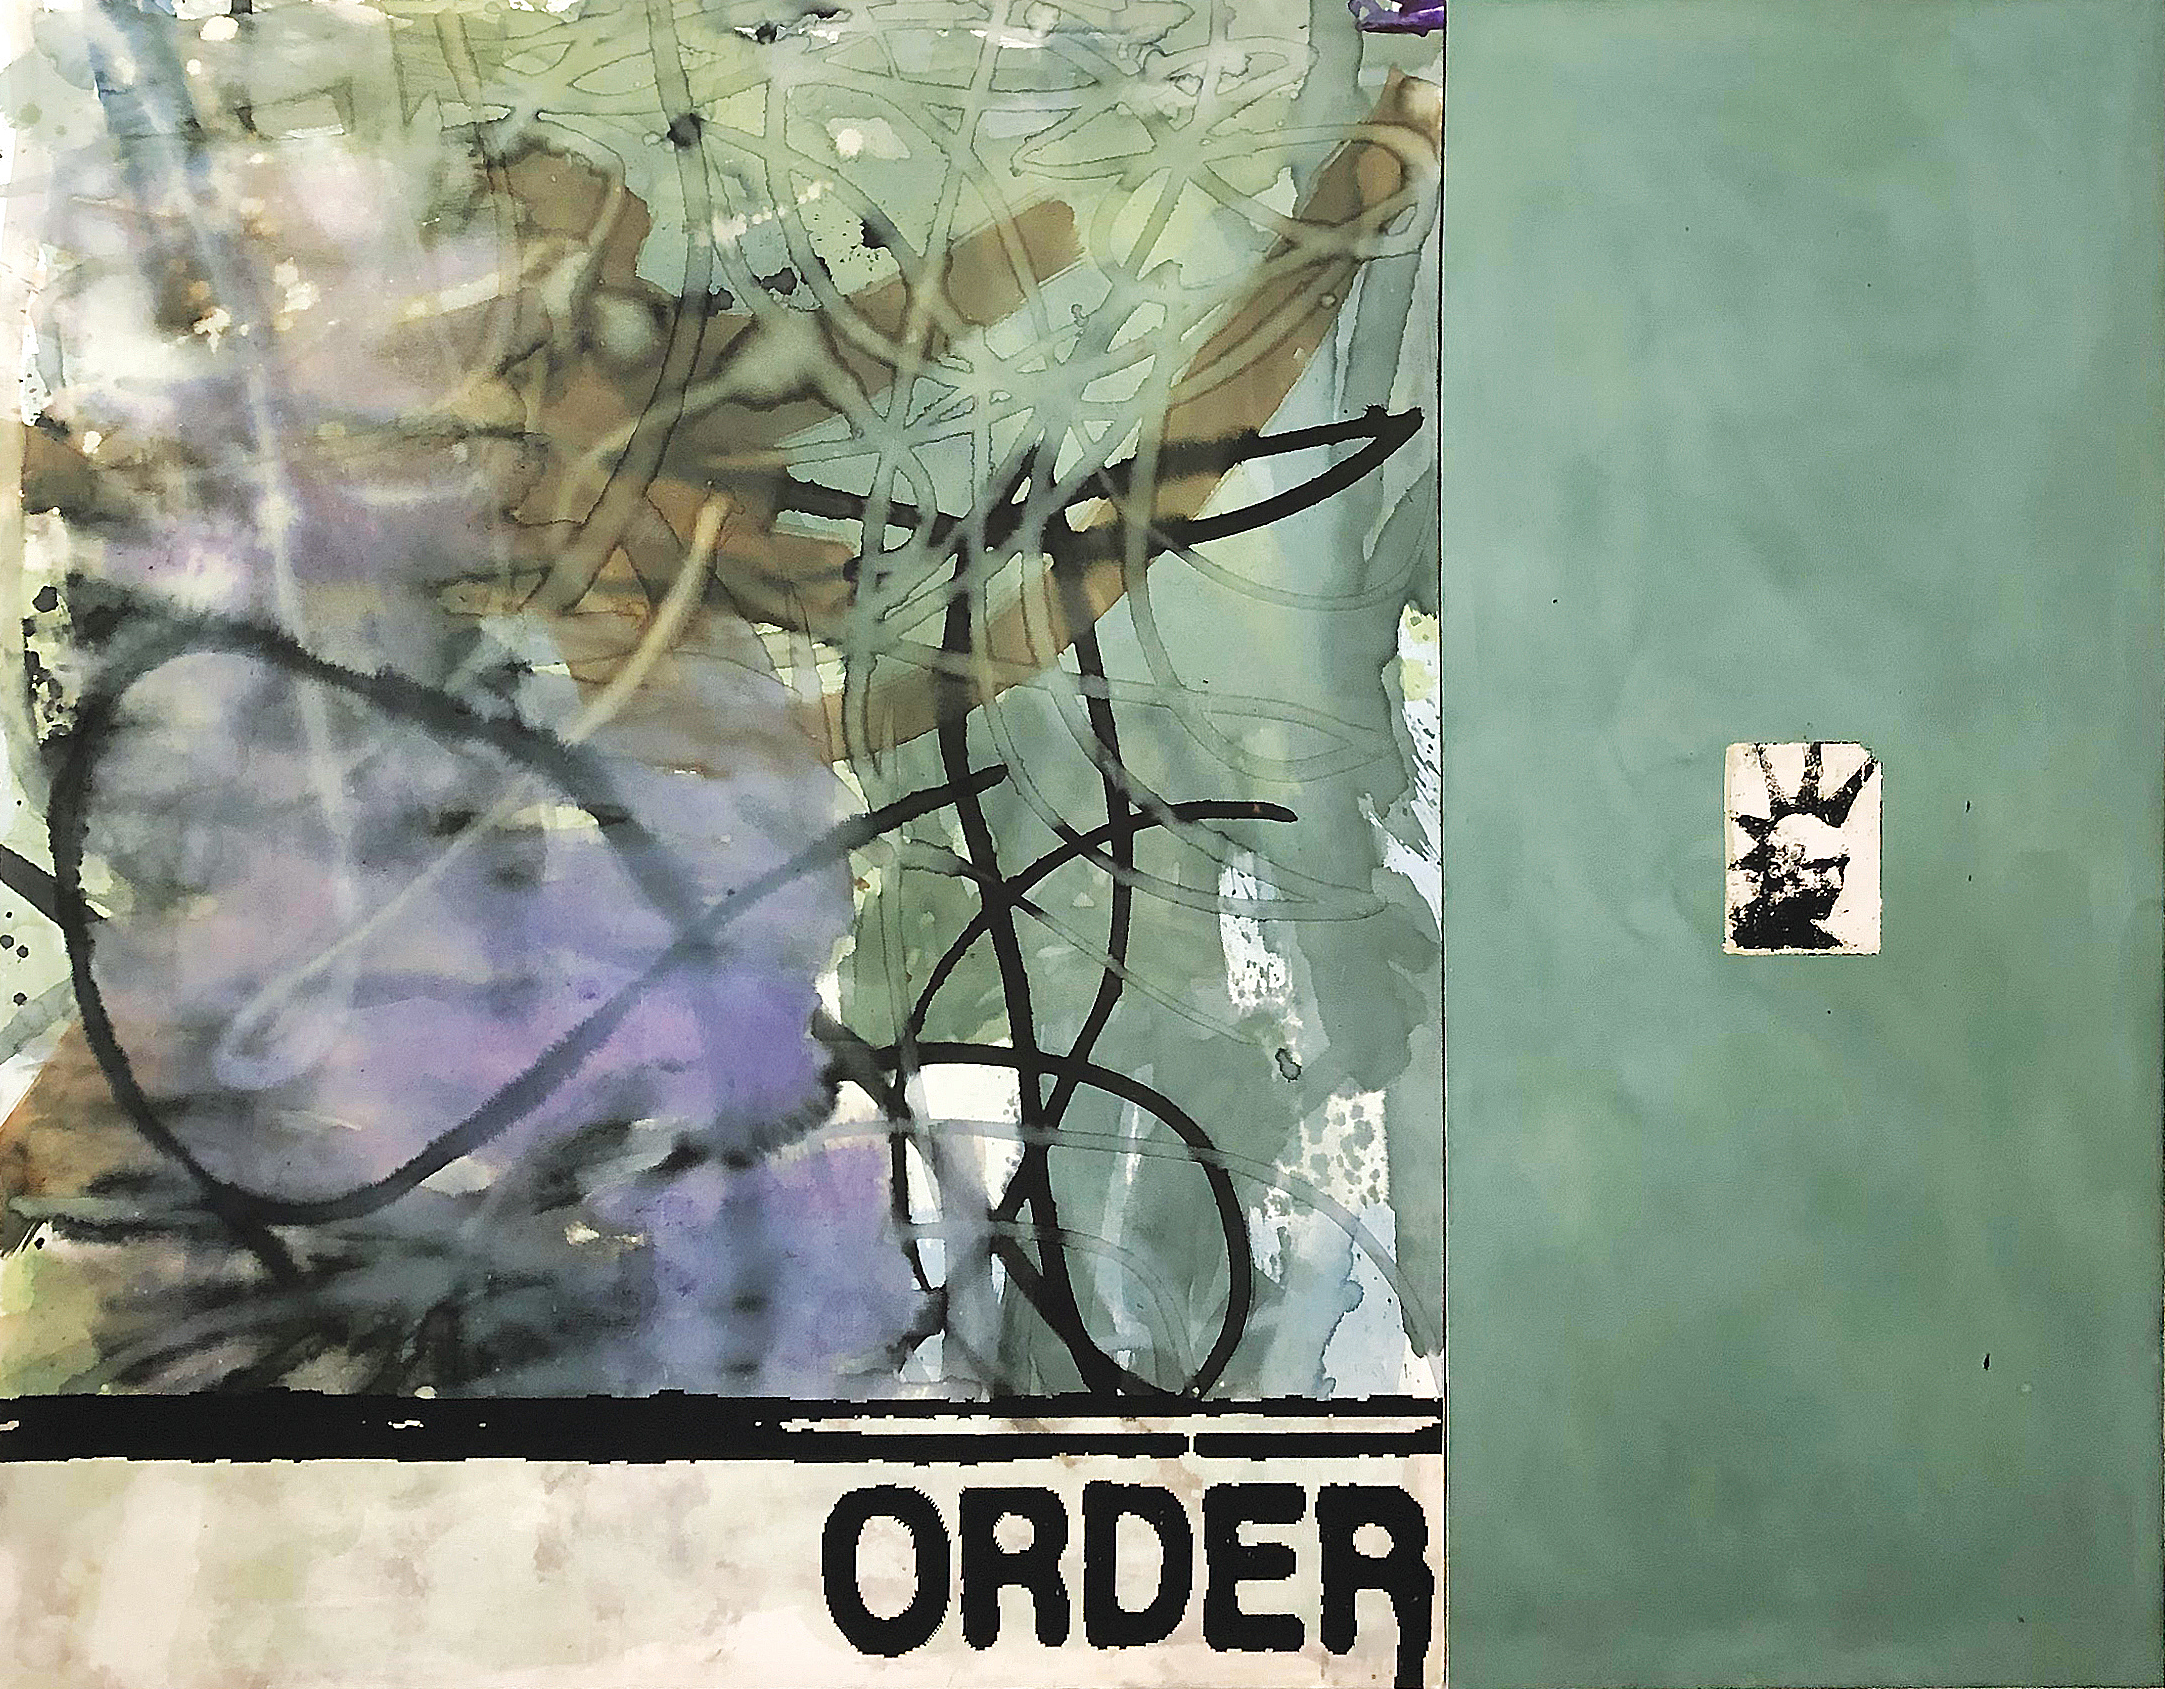   Order_1_CrustKid , 2021, ink, silkscreen, and bleach on canvas, 72 x 90 in. 